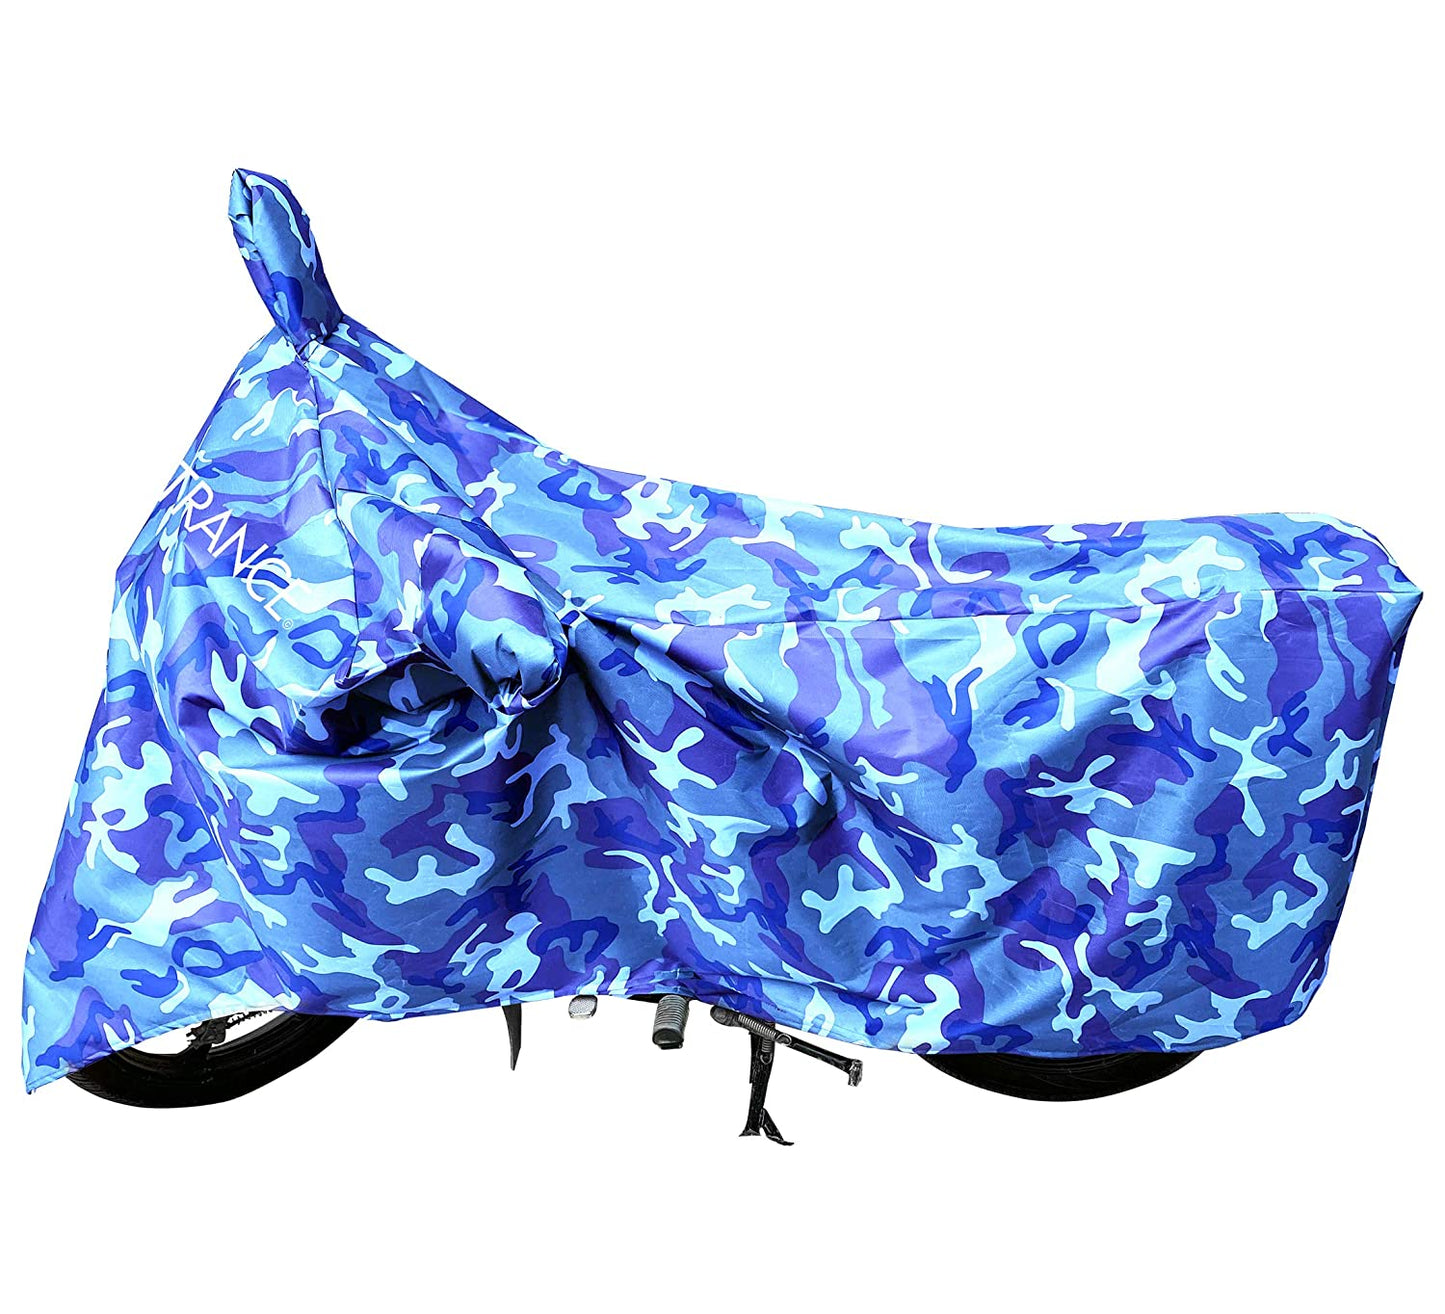 MotoTrance Jungle Bike Body Covers For Bajaj Caliber - Interlock-Stitched Waterproof and Heat Resistant with Mirror Pockets